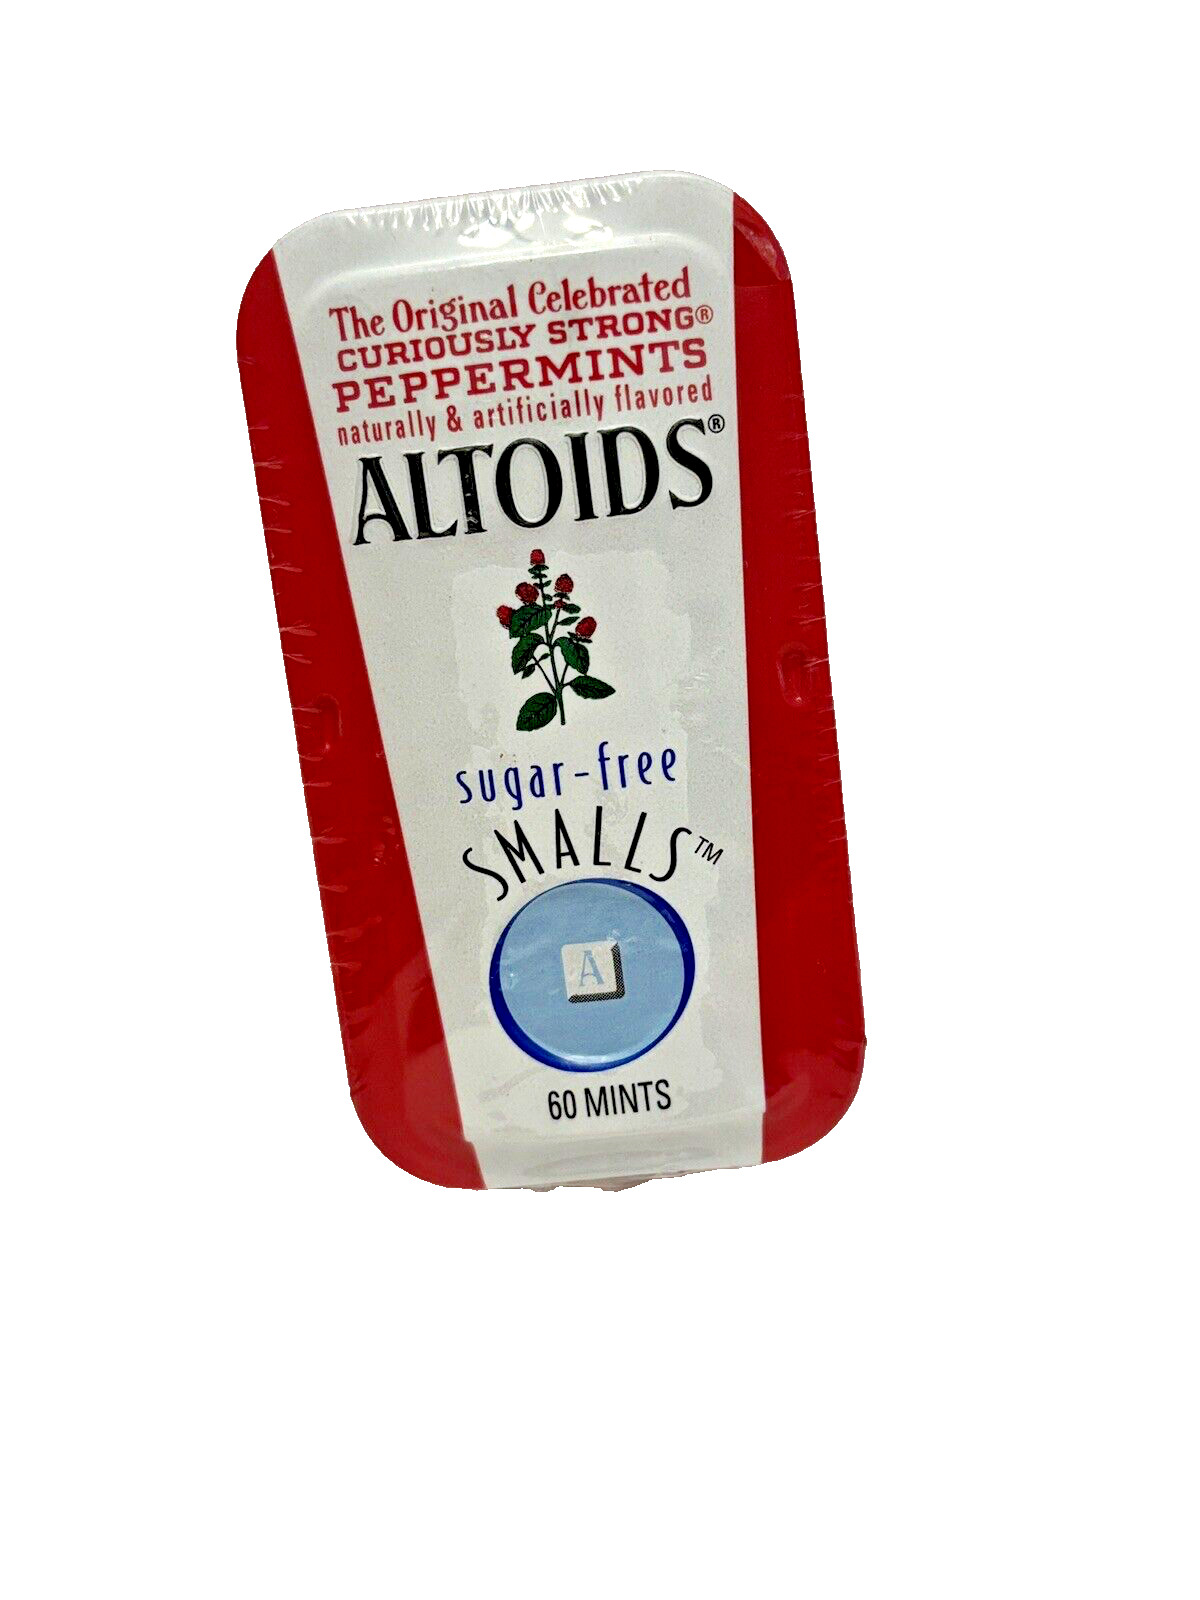 Altoids Smalls Peppermints 60 Mints Sealed Collectible Tin NOS Expired